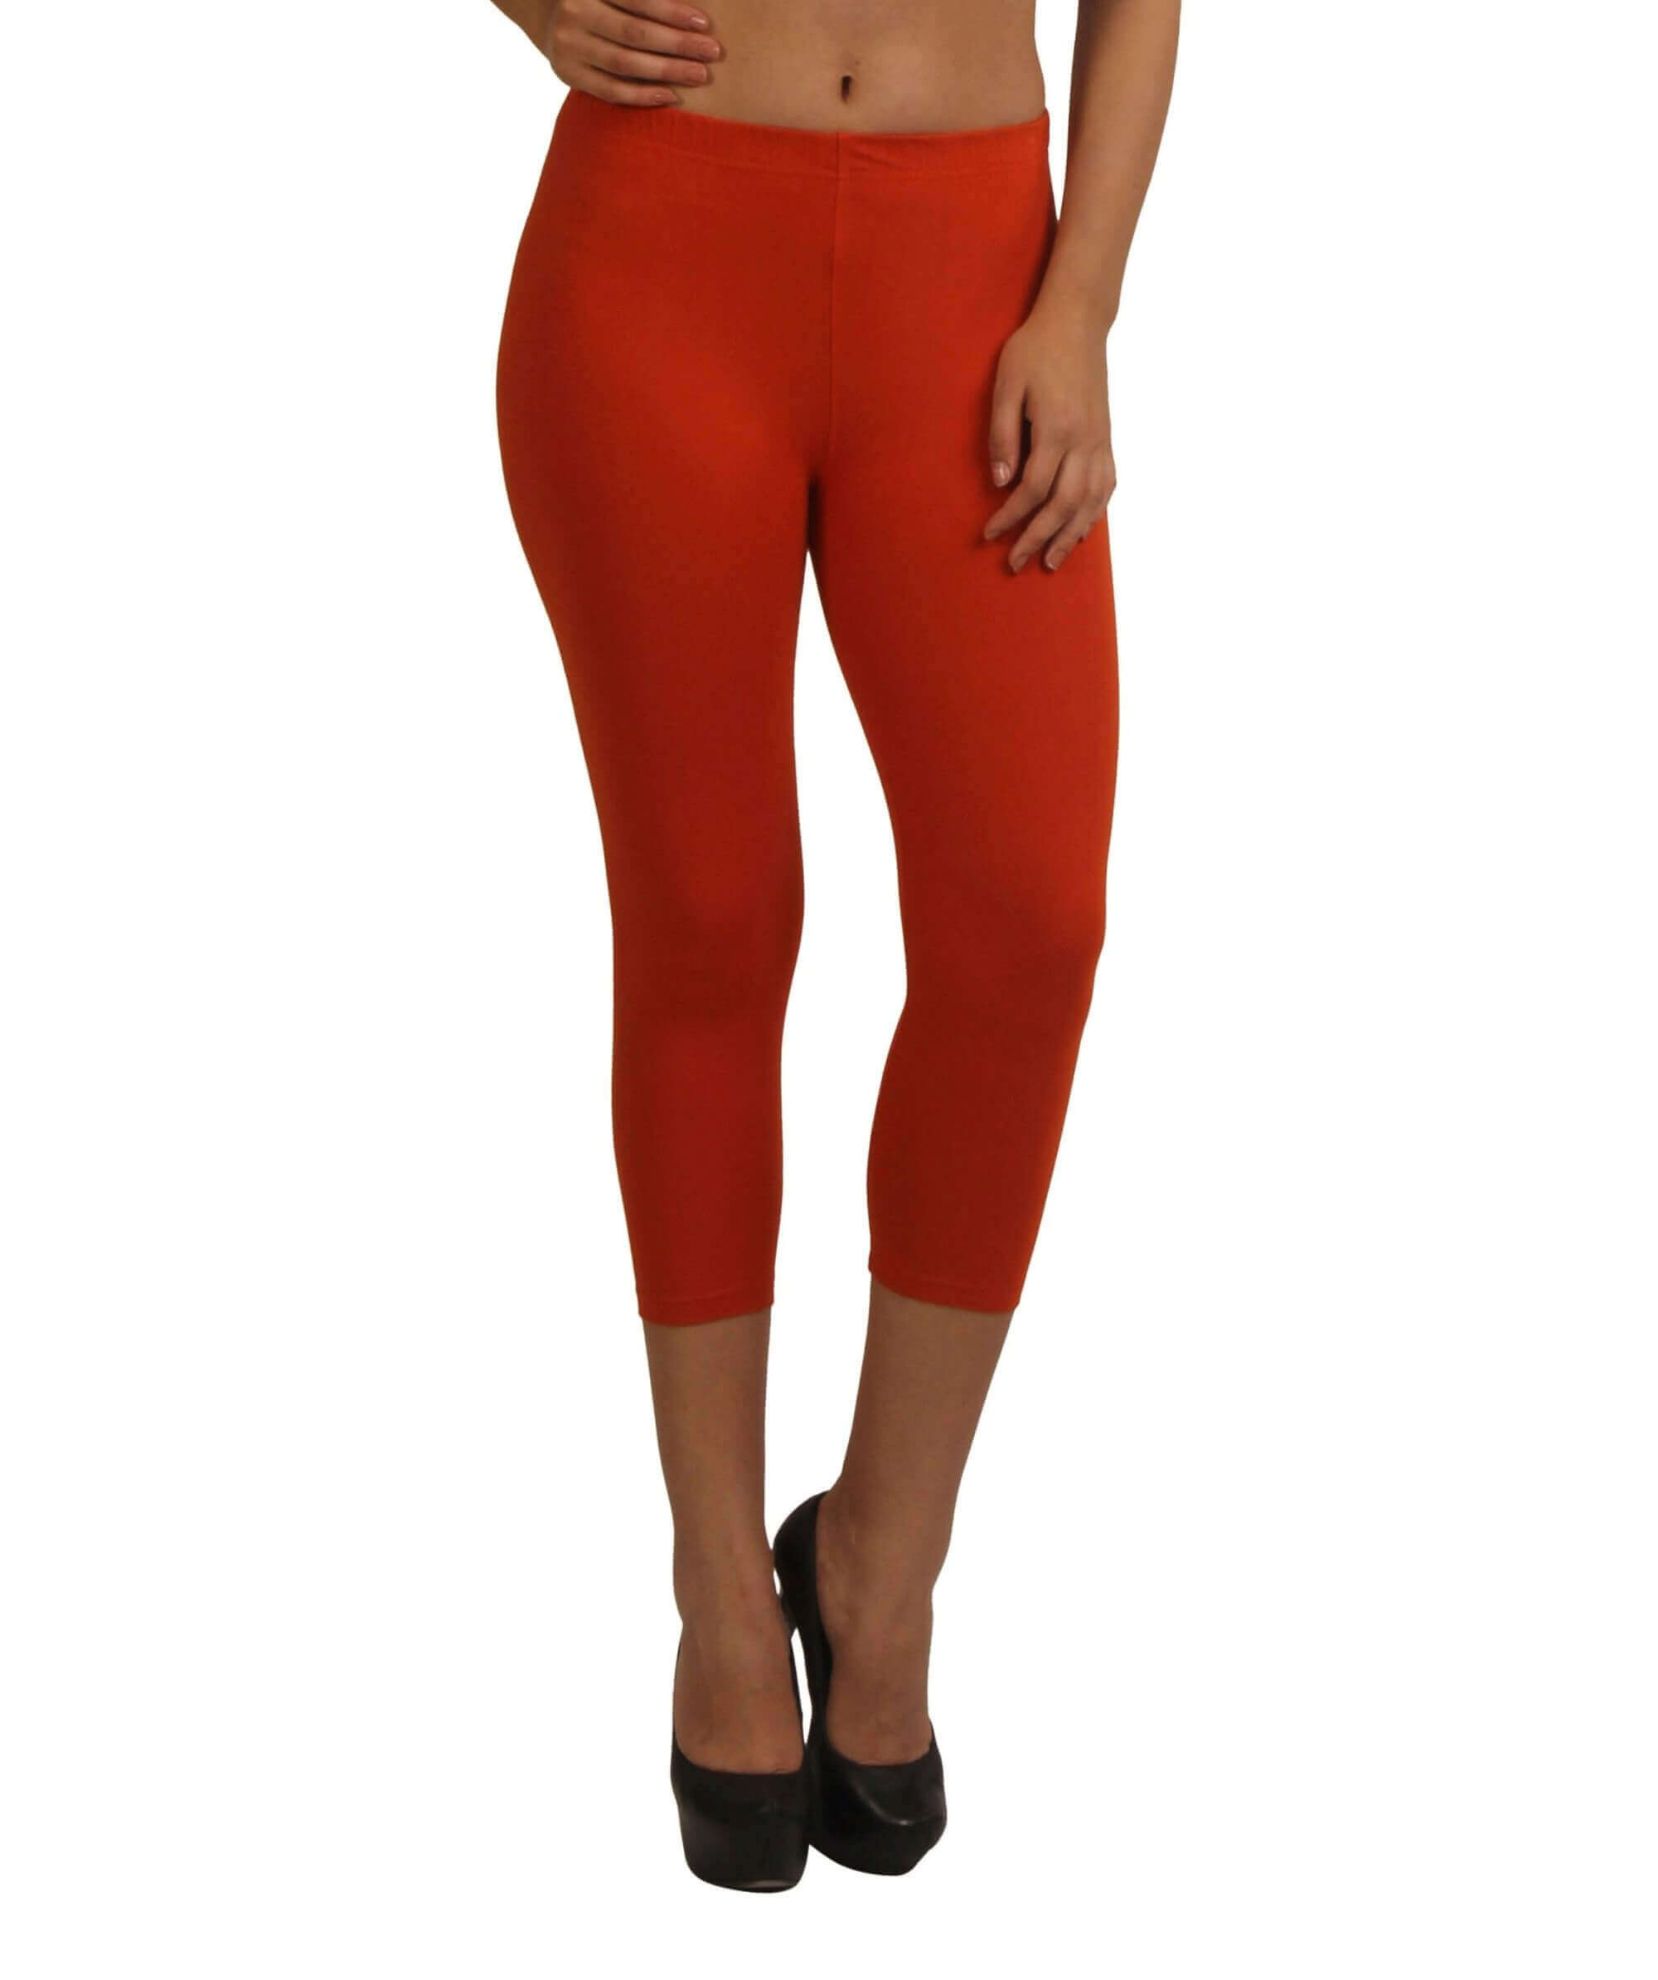 https://frenchtrendz.com/images/thumbs/0004002_frenchtrendz-cotton-spandex-rust-capri.jpeg